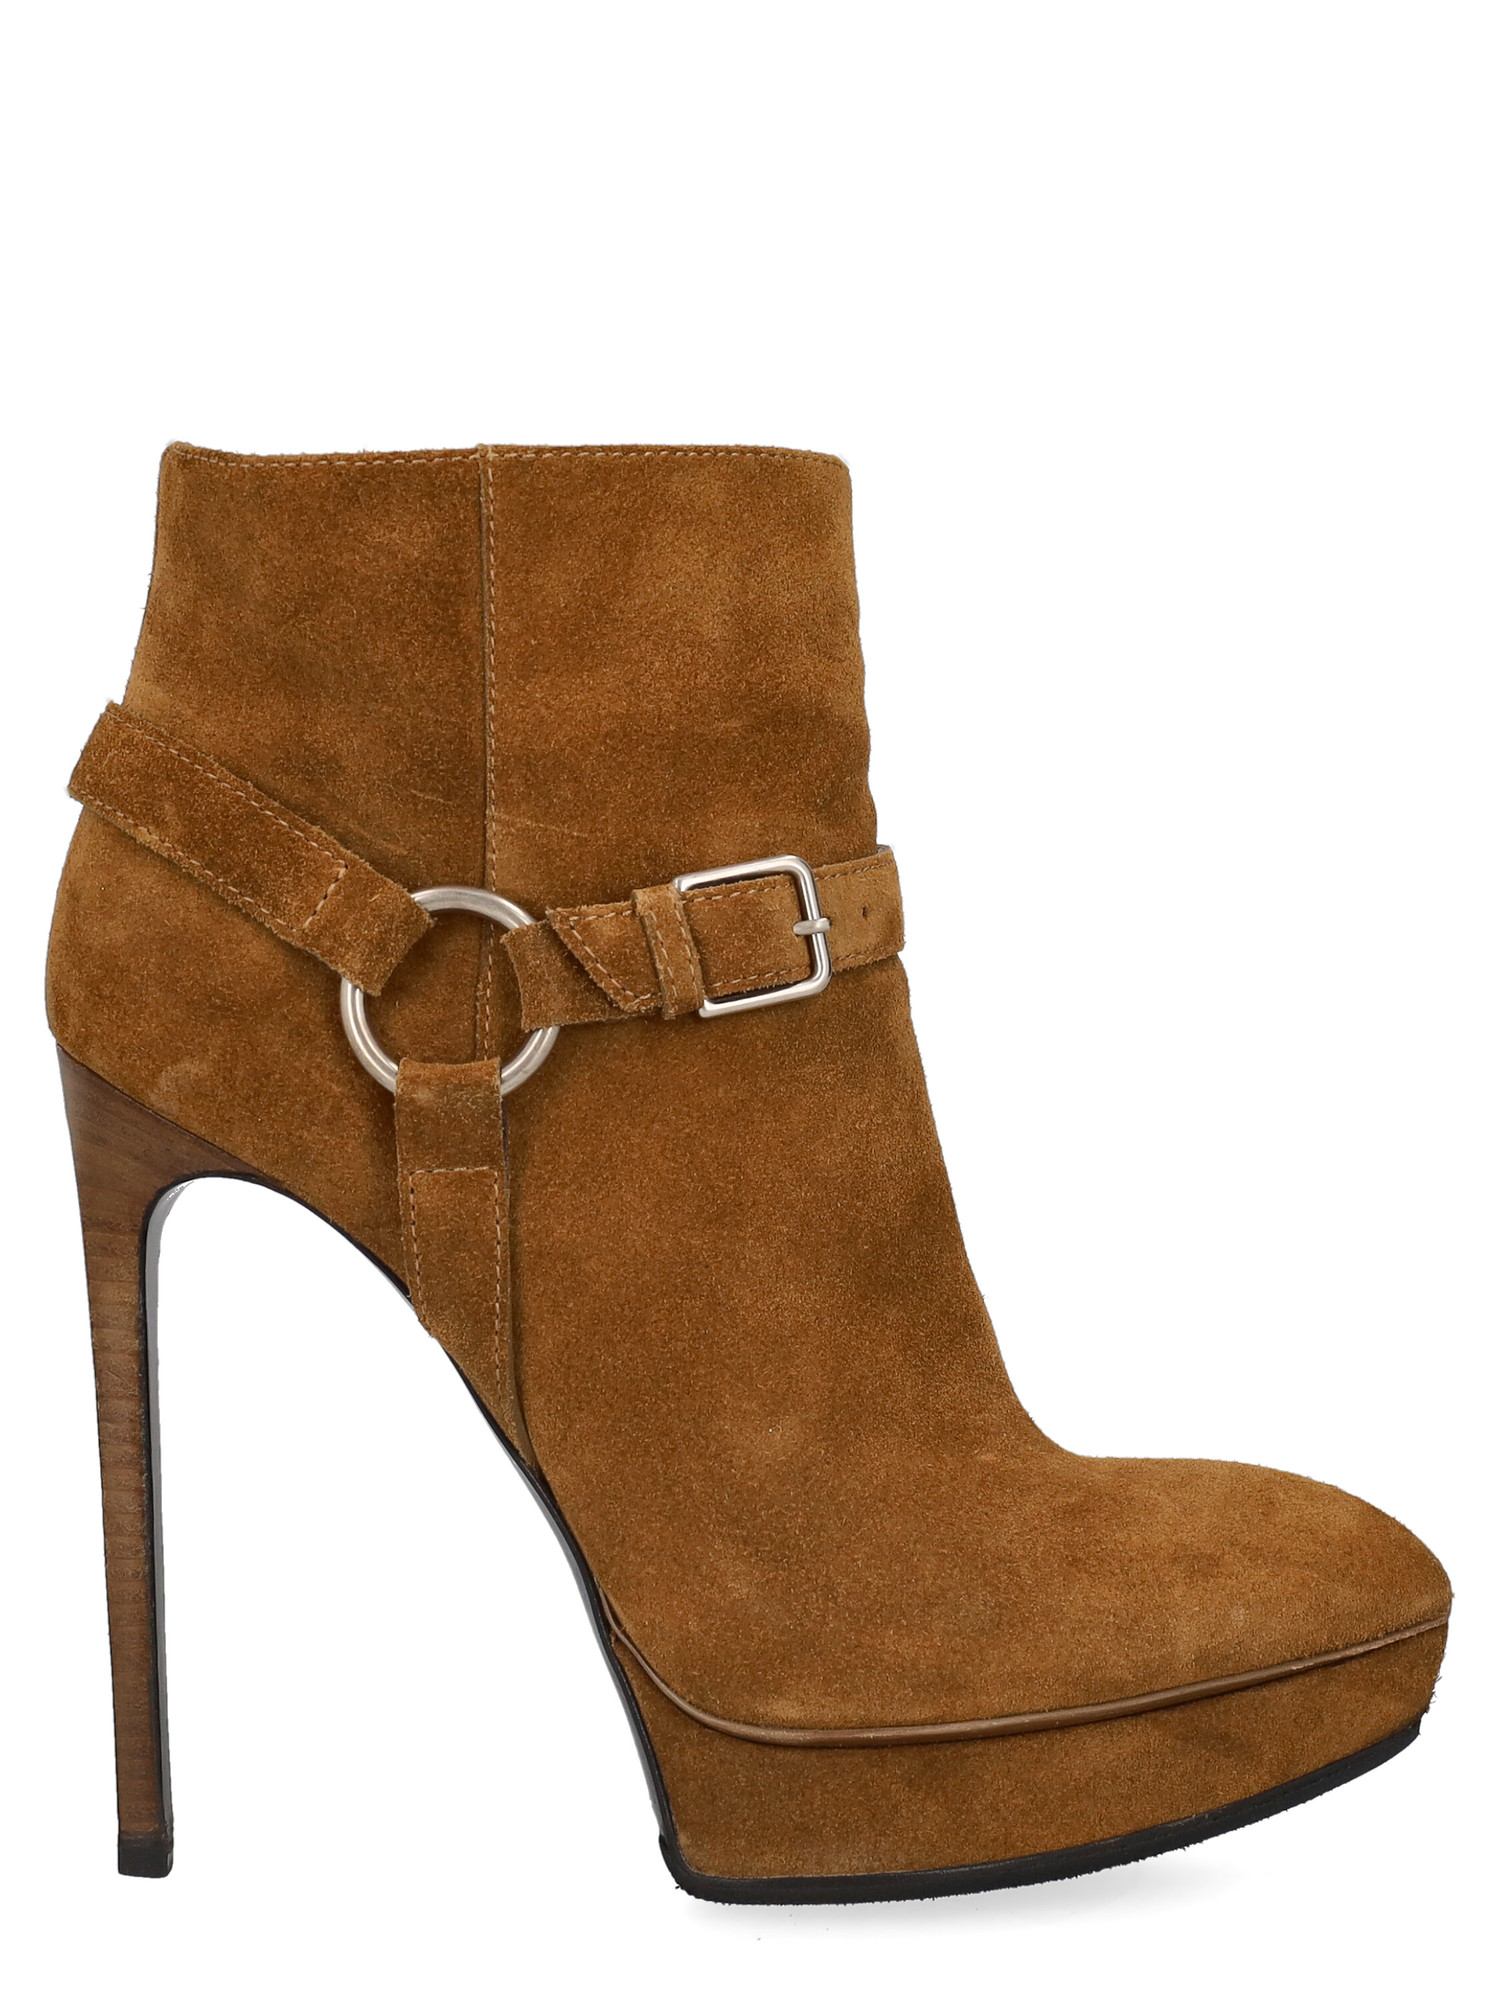 Pre-owned Saint Laurent Women's Ankle Boots -  - In Camel Color Leather